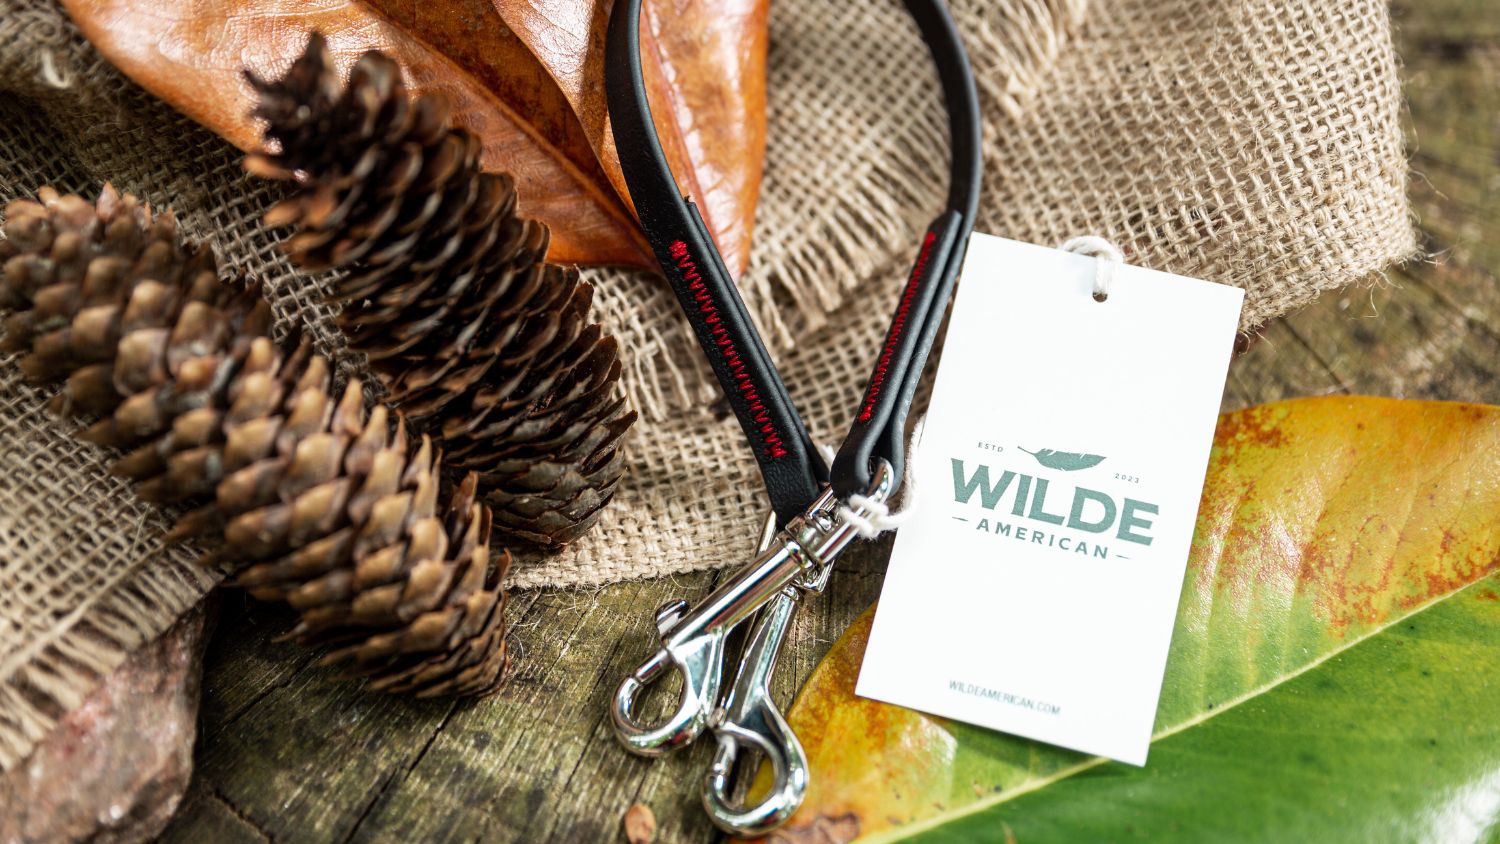 Wilde American Dog Leash flat lay on burlap and surrounded by leaves and pinecones